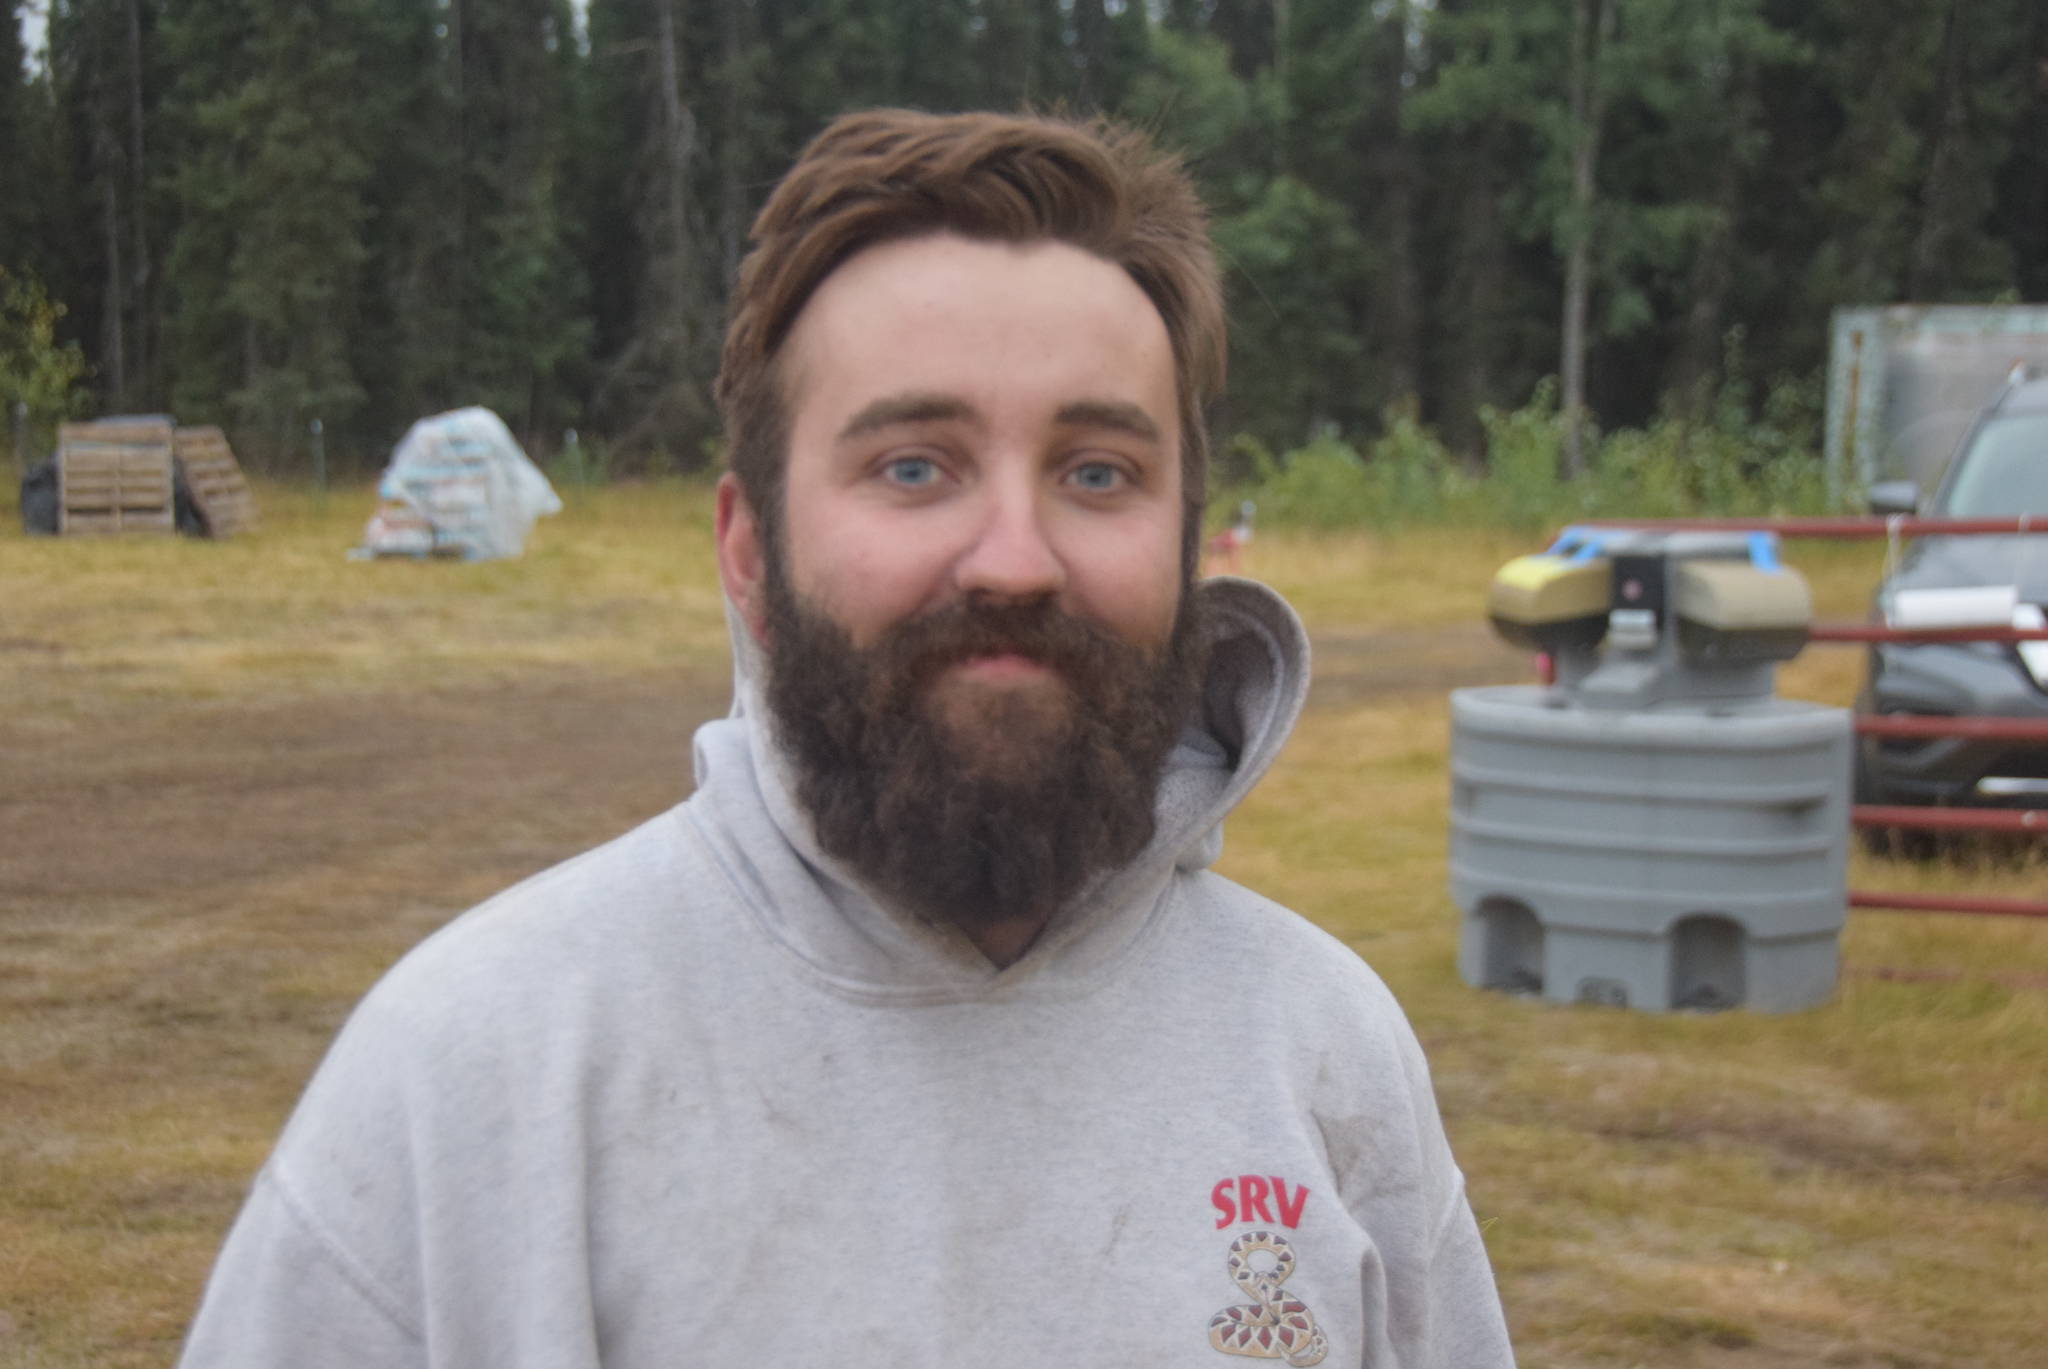 Jacob Mayo, a firefighter from Vale, Oregon, smiles for the camera at the Otter Creek Spike Camp 5 miles north of Sterling, Alaska on Aug. 30, 2019. (Photo by Brian Mazurek/Peninsula Clarion)